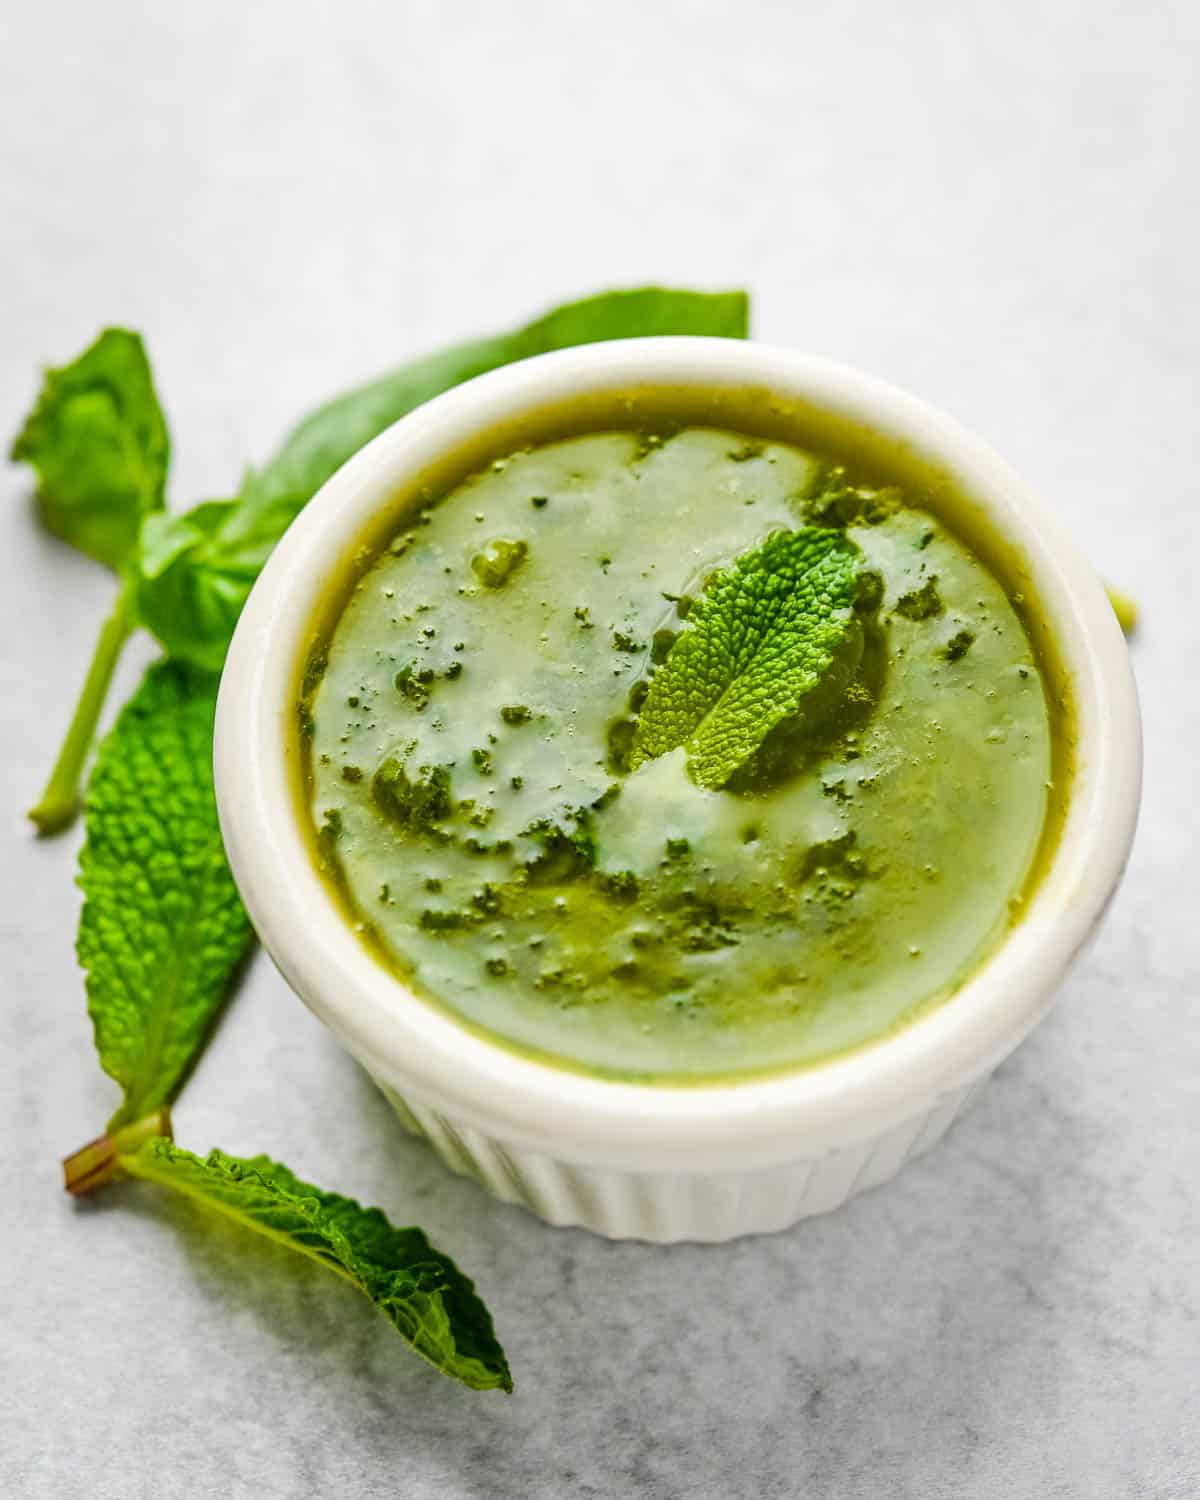 The herb dressing with a piece of mint in it.